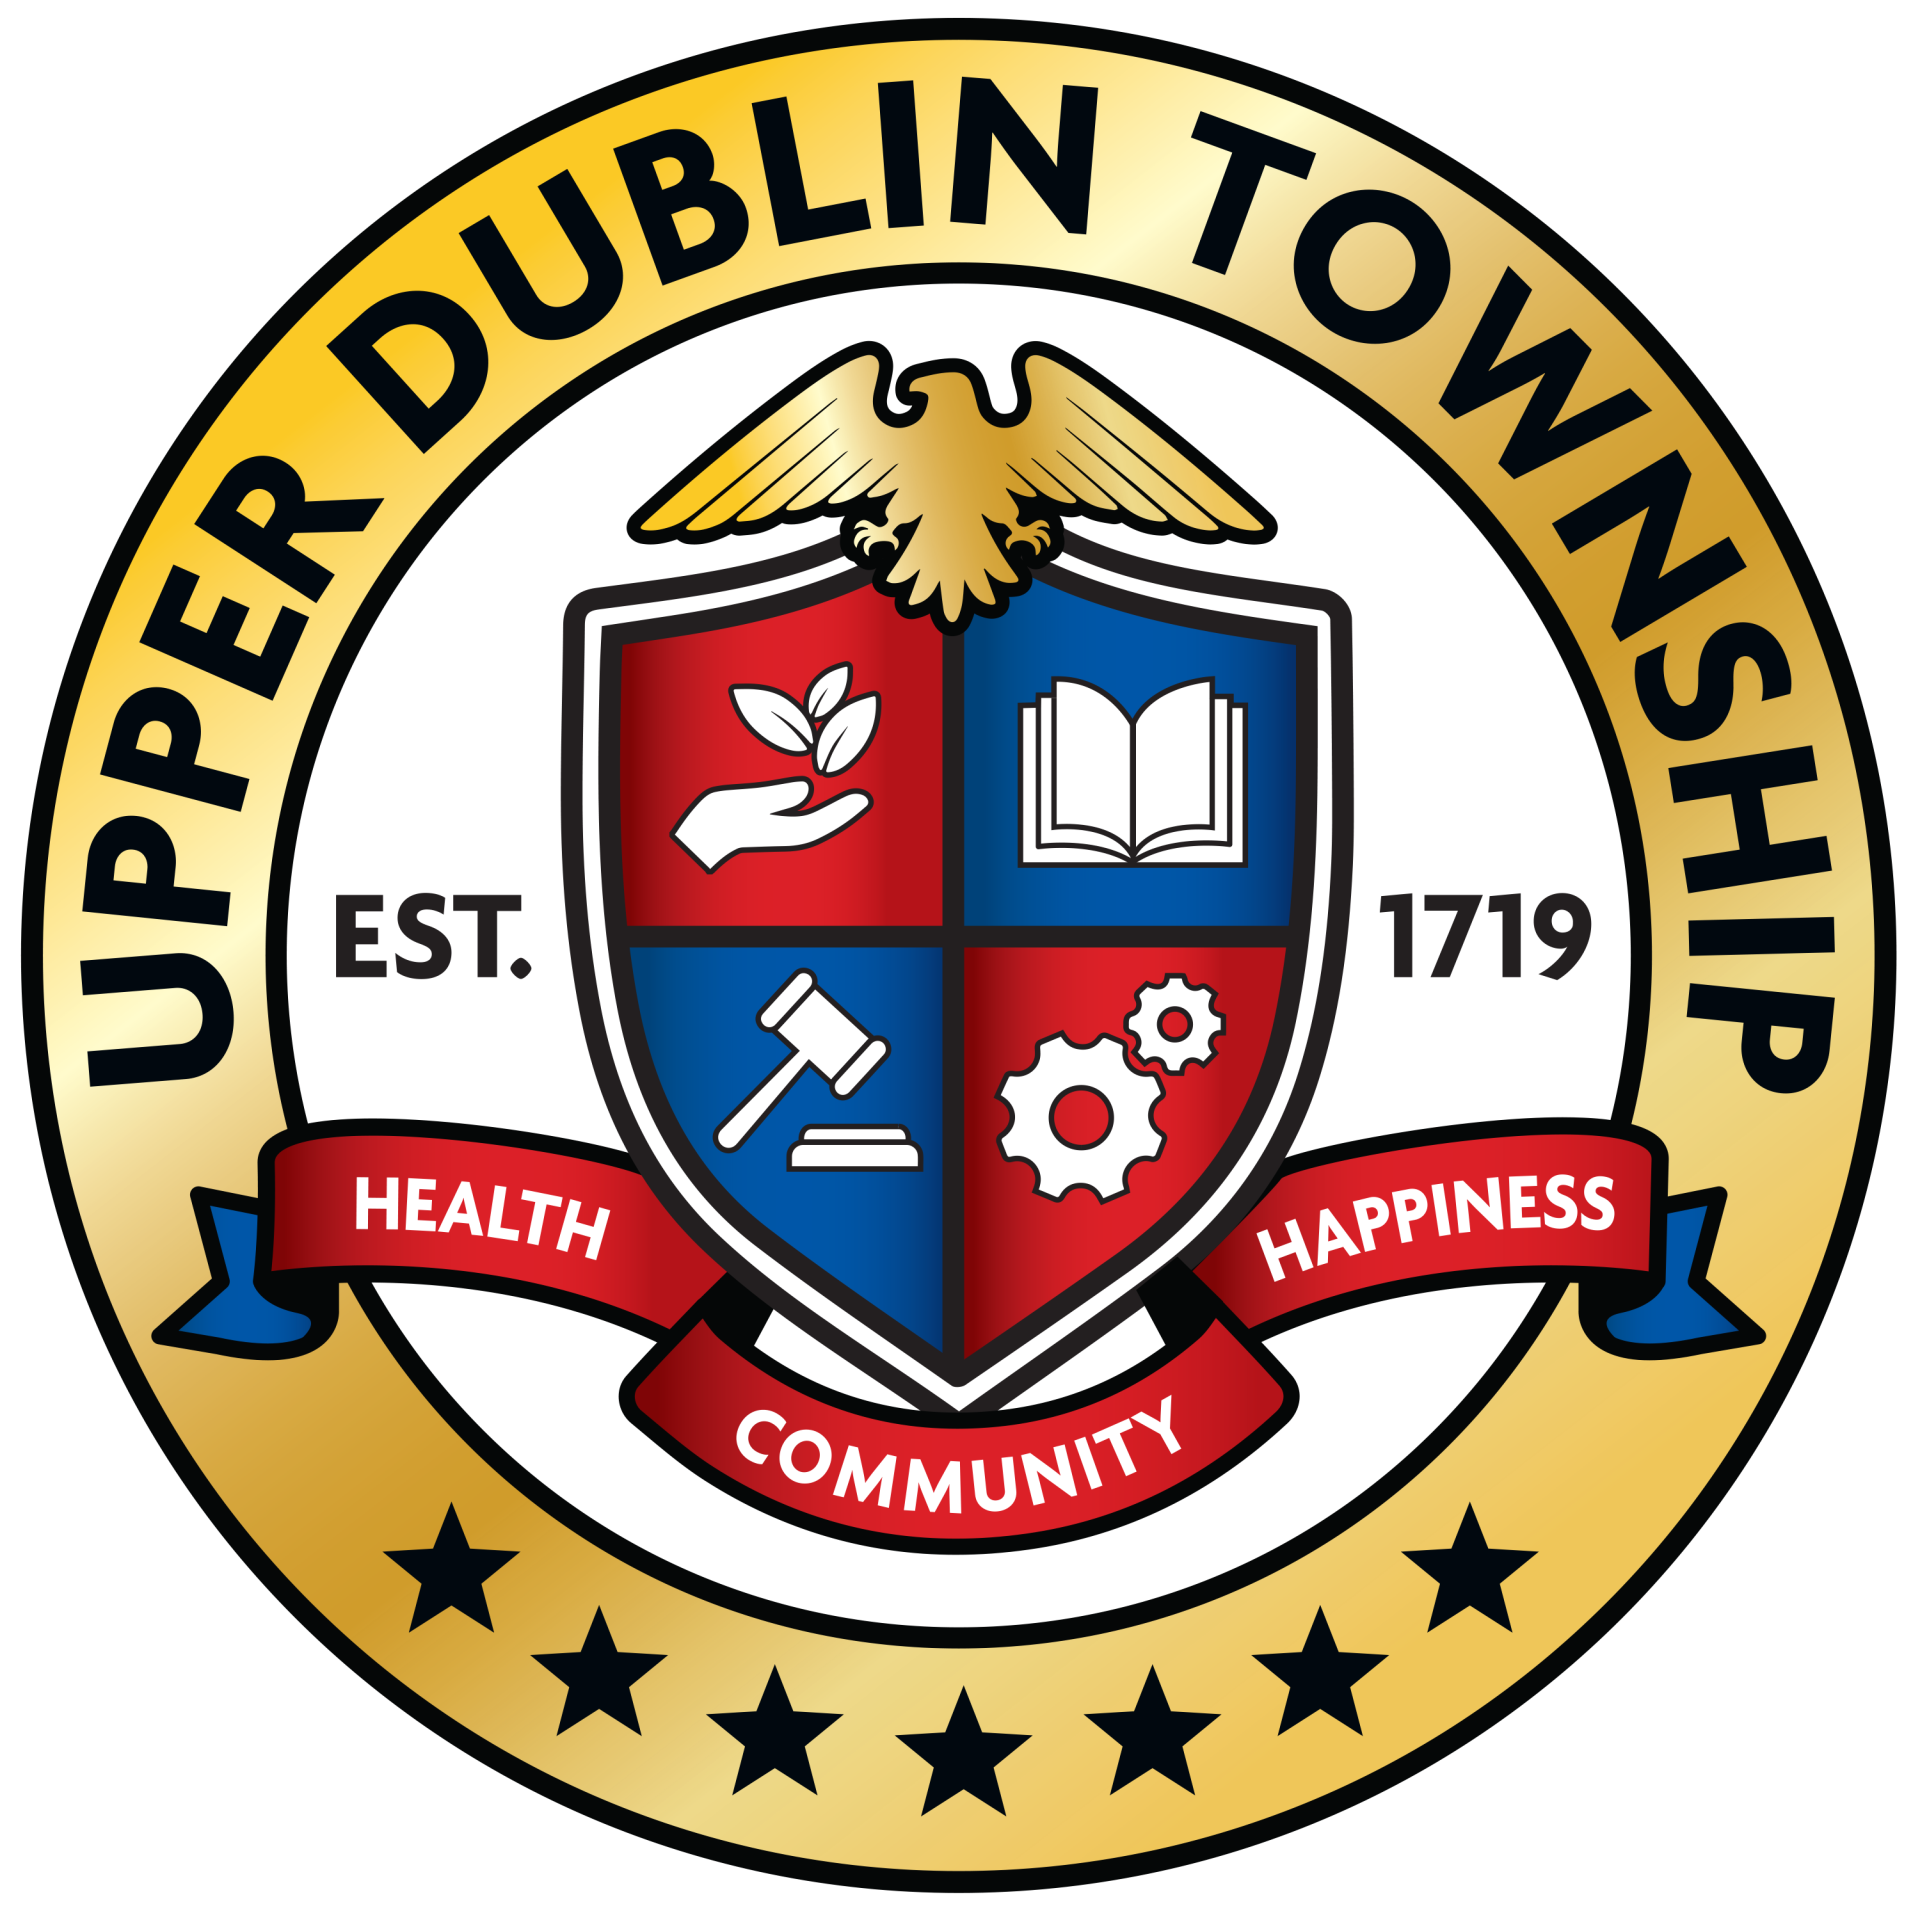 upper dublin township seal - gold circle with crest in the middle representing growth, education, government and industry.